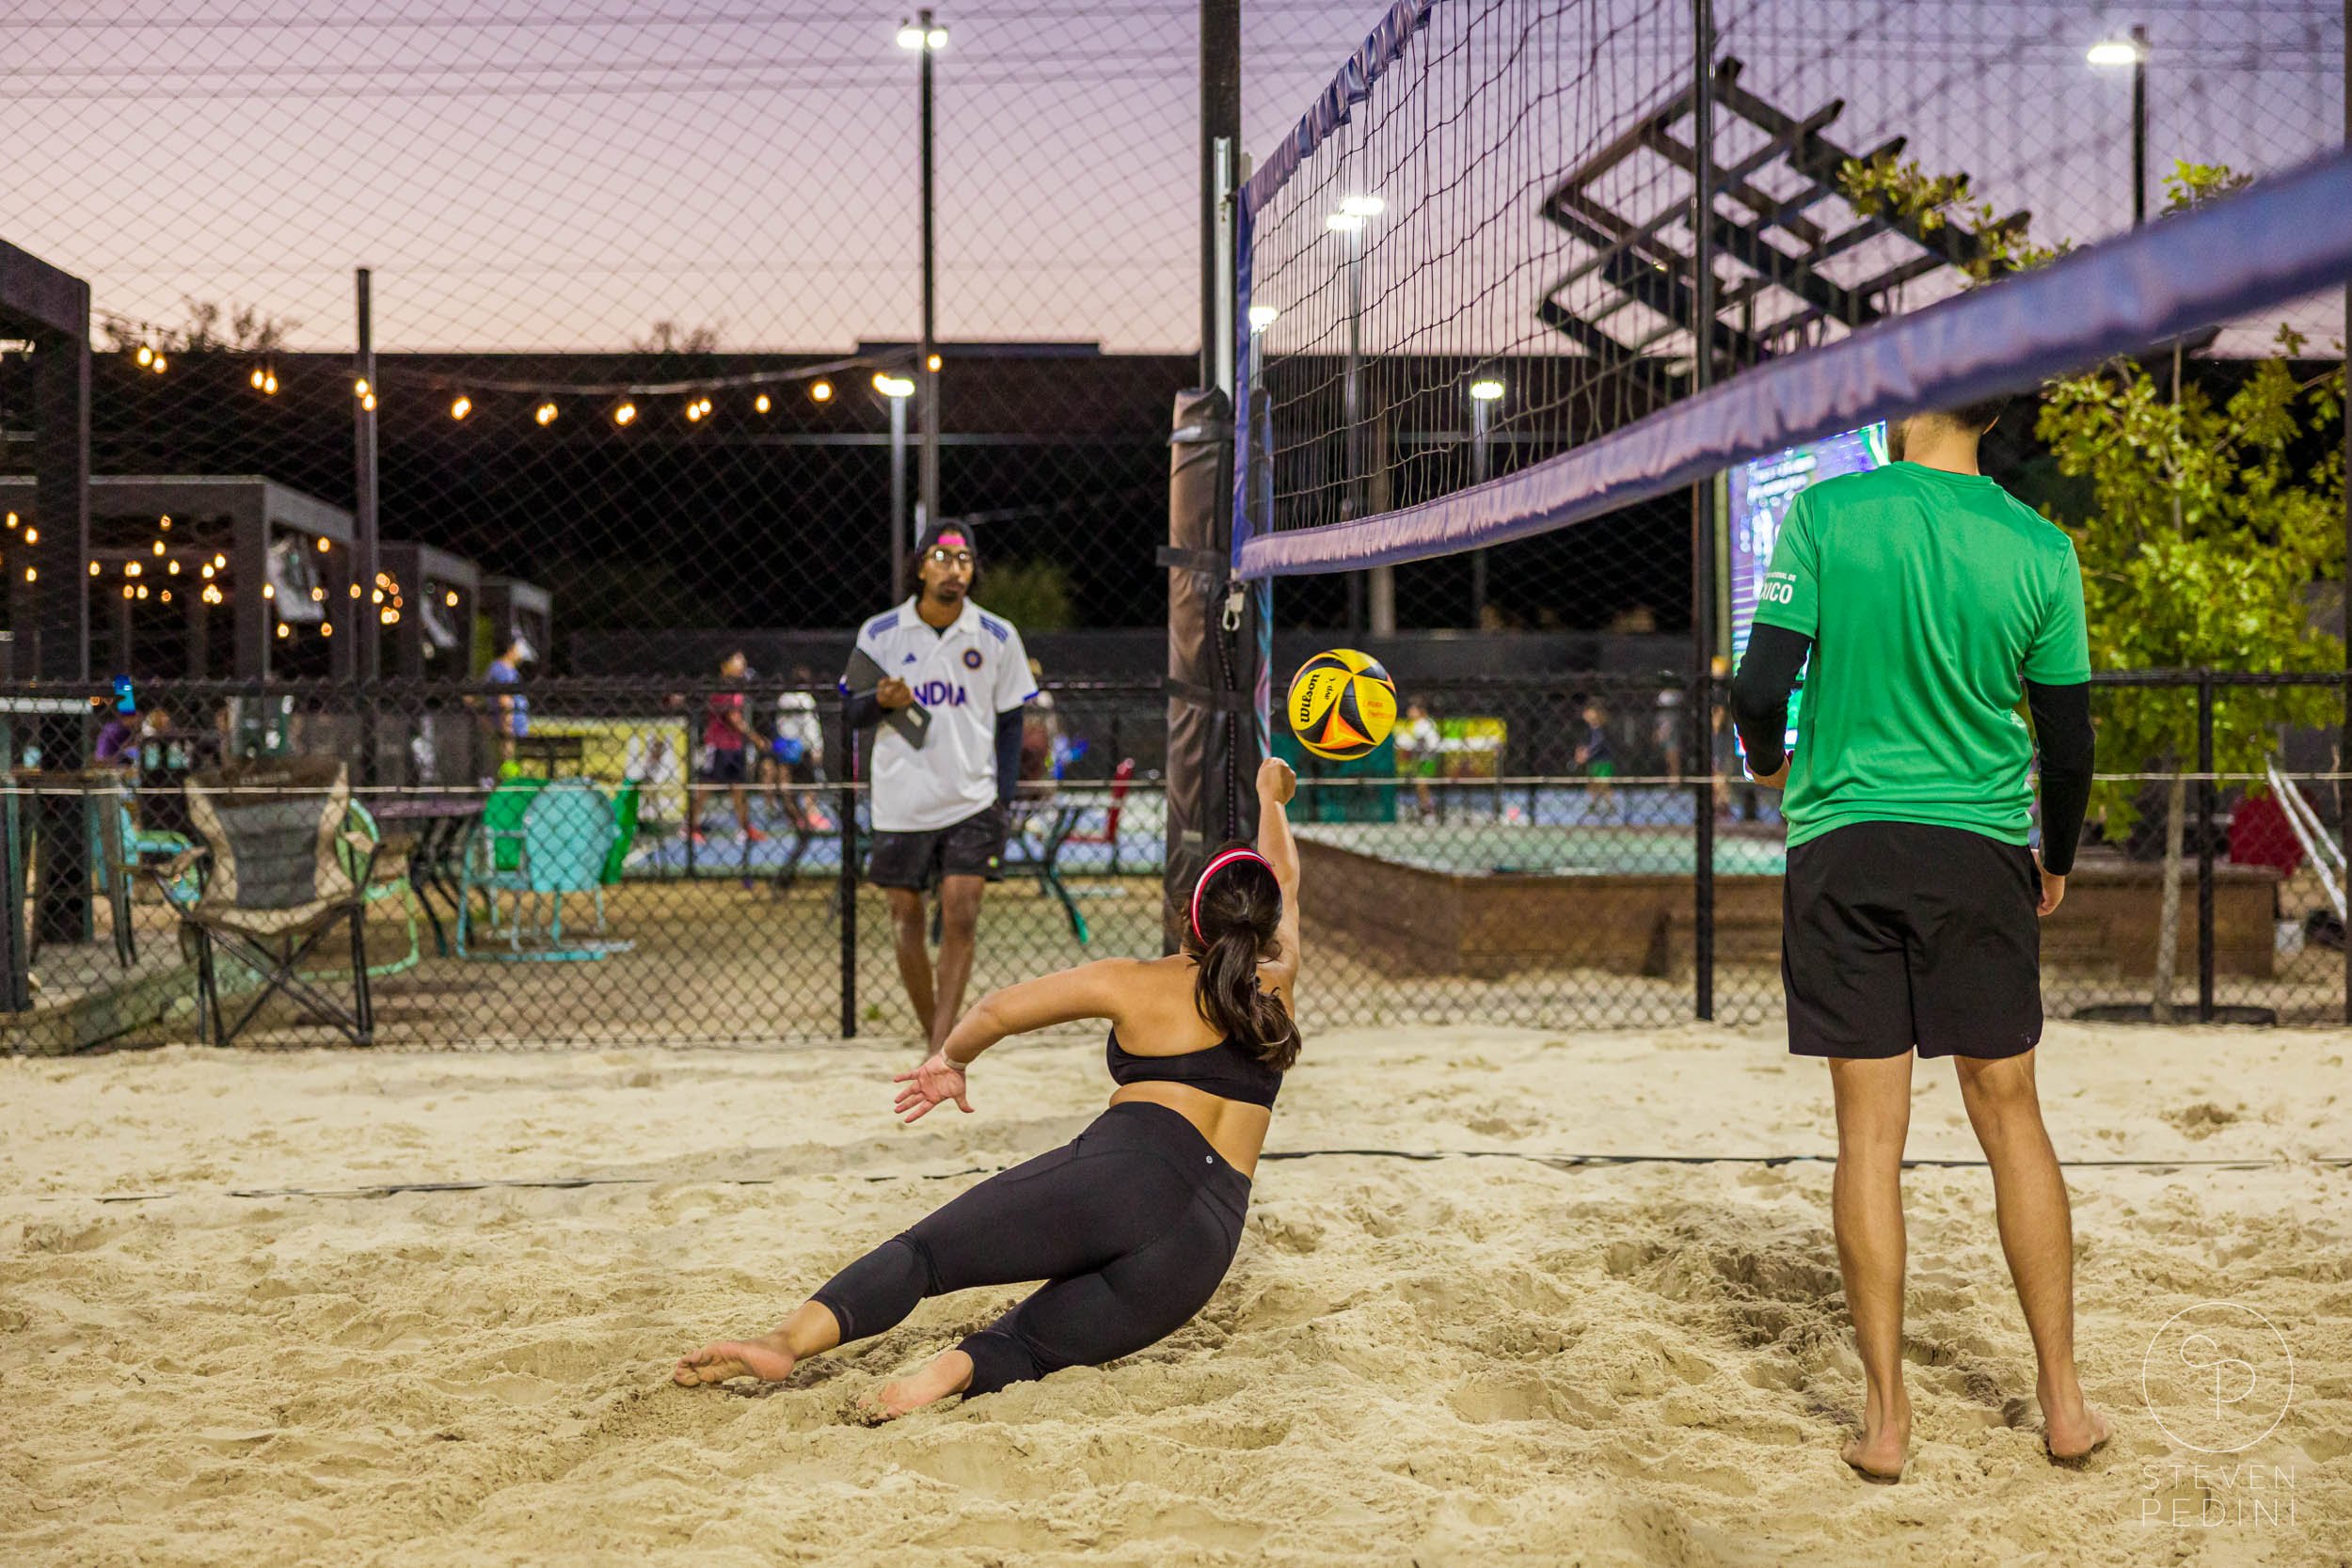 Steven Pedini Photography - Bumpy Pickle - Sand Volleyball - Houston TX - World Cup of Volleyball - 00308.jpg